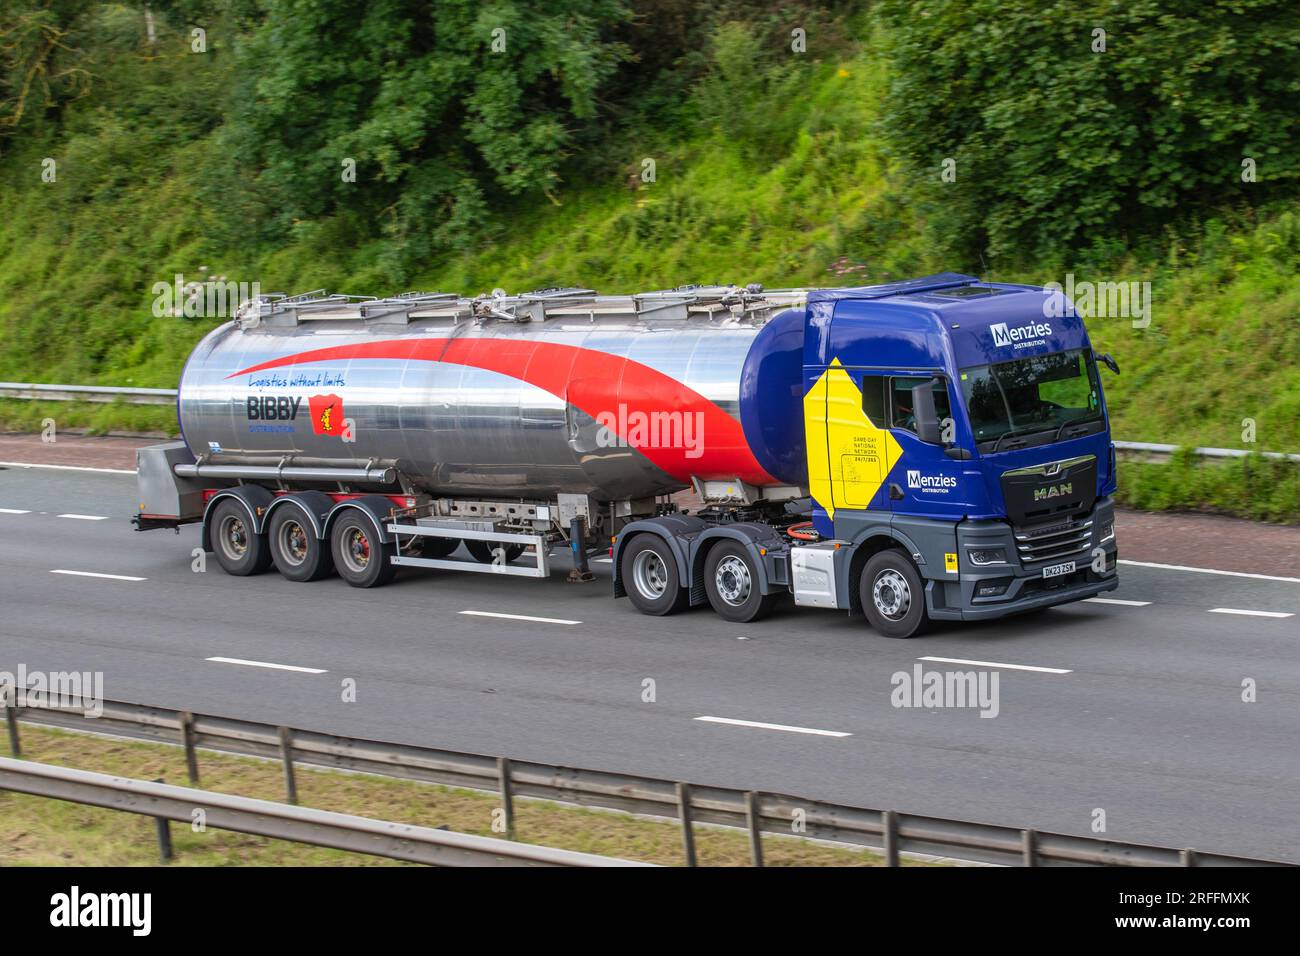 Bibby Distribution Employee Tanker Driver. Bulk liquid chocolate transport, Menzies Distribution; Blue MAN 26.510 6x2/2 BLS XX 12419cc Diesel HGV Tractor Unit powertrain; travelling on the M6 motorway in Greater Manchester, UK Stock Photo